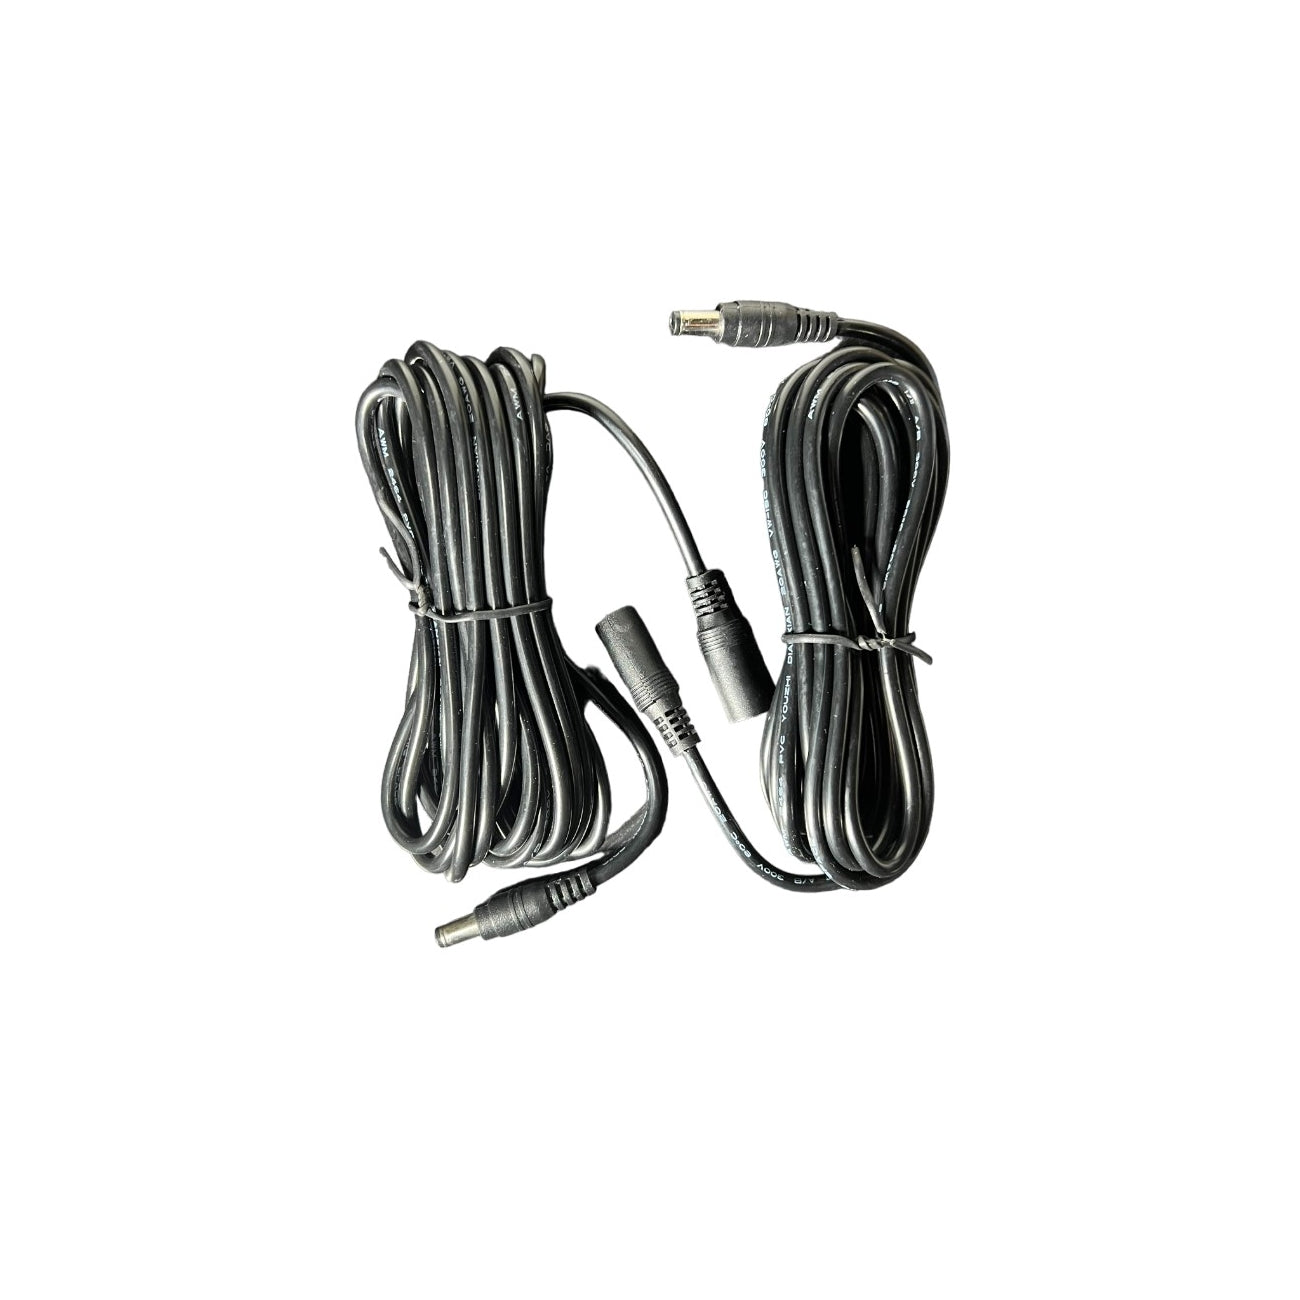 2 Pack (Black) SMAVCO 11ft Extra Long Cable Male to Female Connector for Hunter Douglas PowerView 2002000036 2989048000 Amigo 7806000000-SMAVtronics